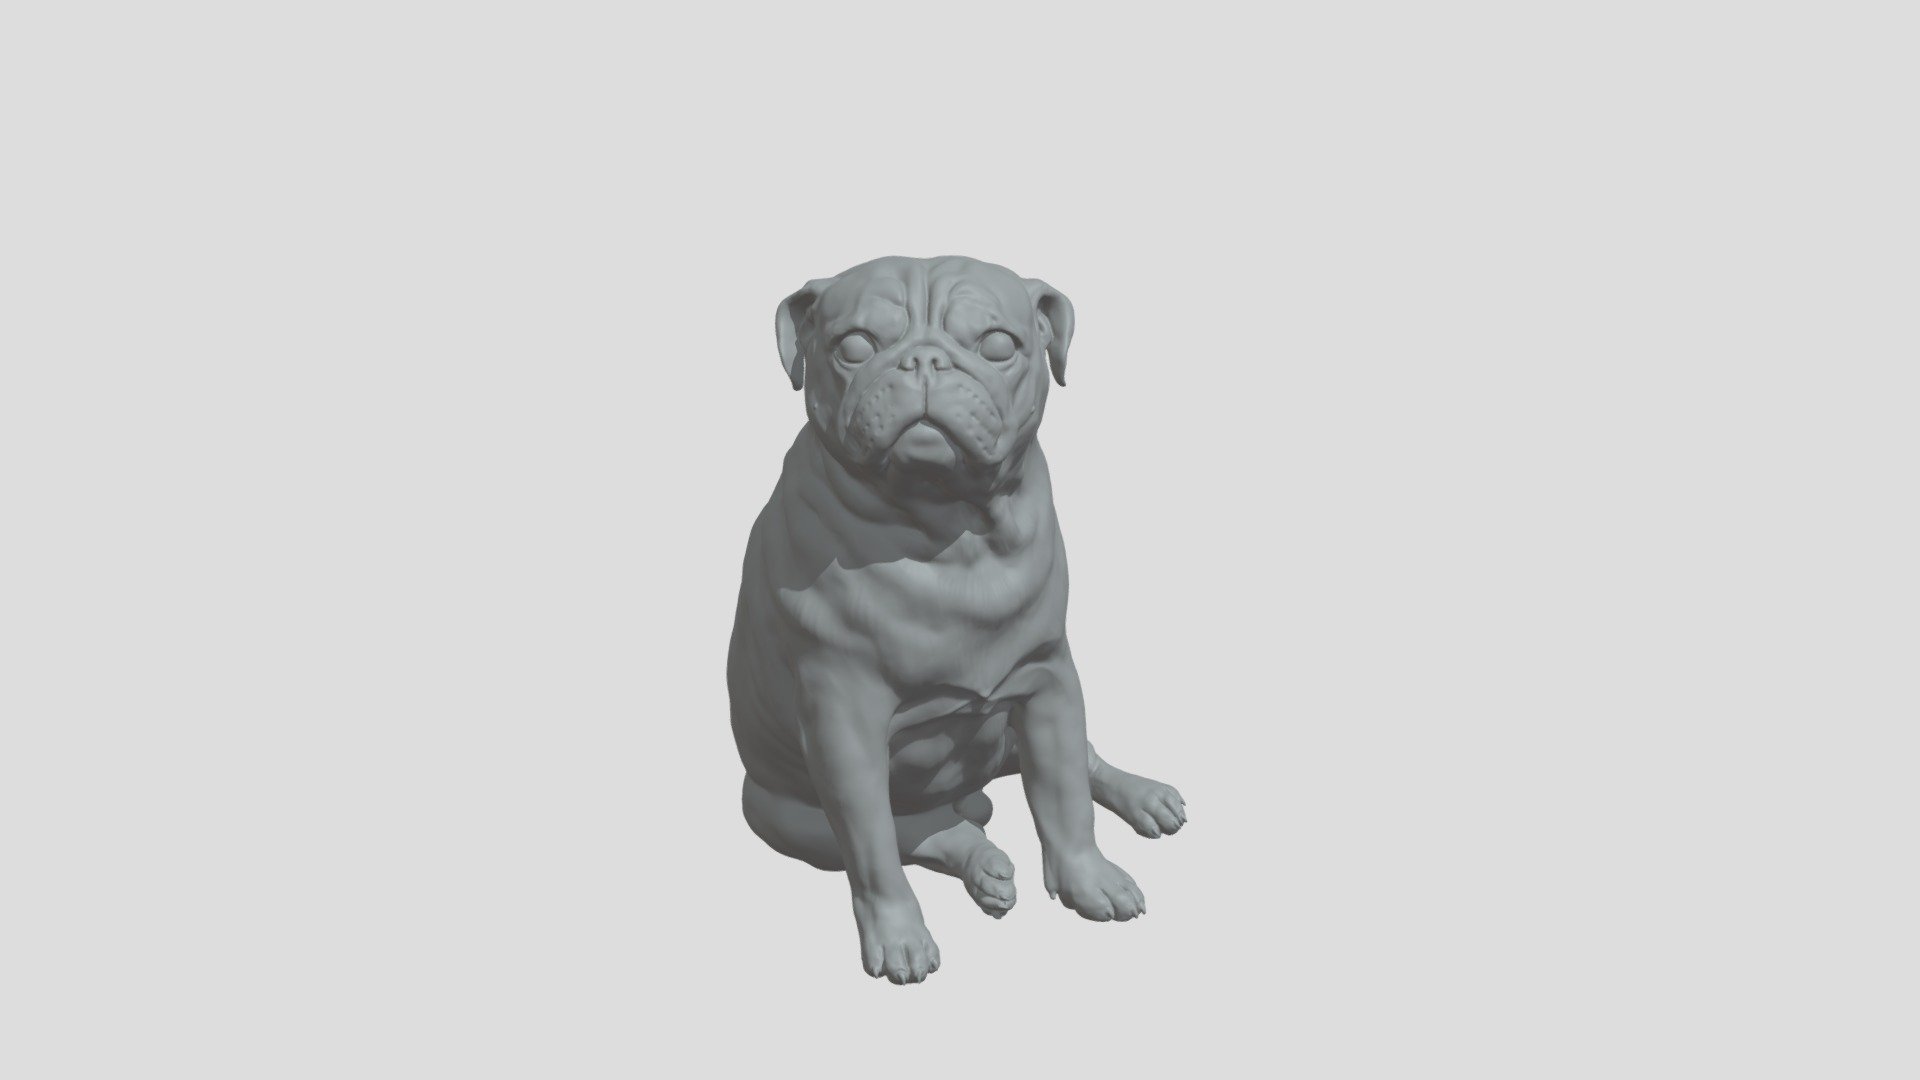 Rocky The Pug
A model I made as a present for my boyfriend's Birthday to be 3D printed and cast out of silver - Rocky The Pug - 3D model by MariaTrofimova 3d model